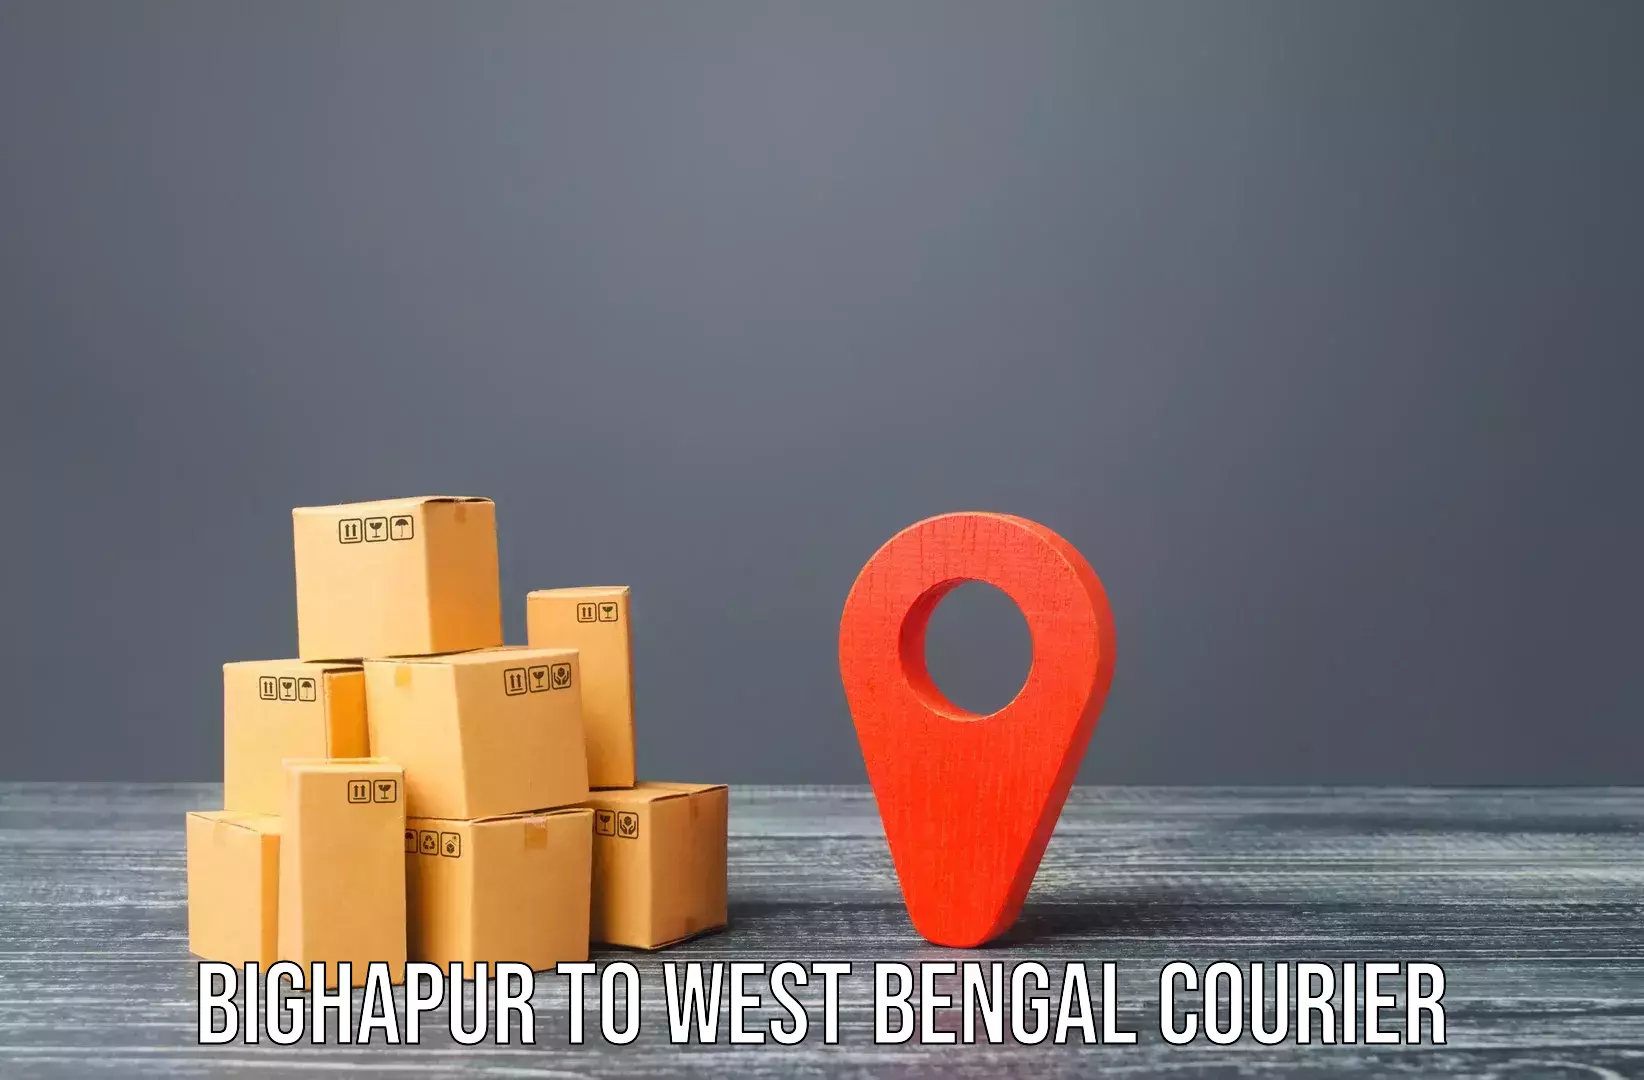 Specialized moving company Bighapur to West Bengal